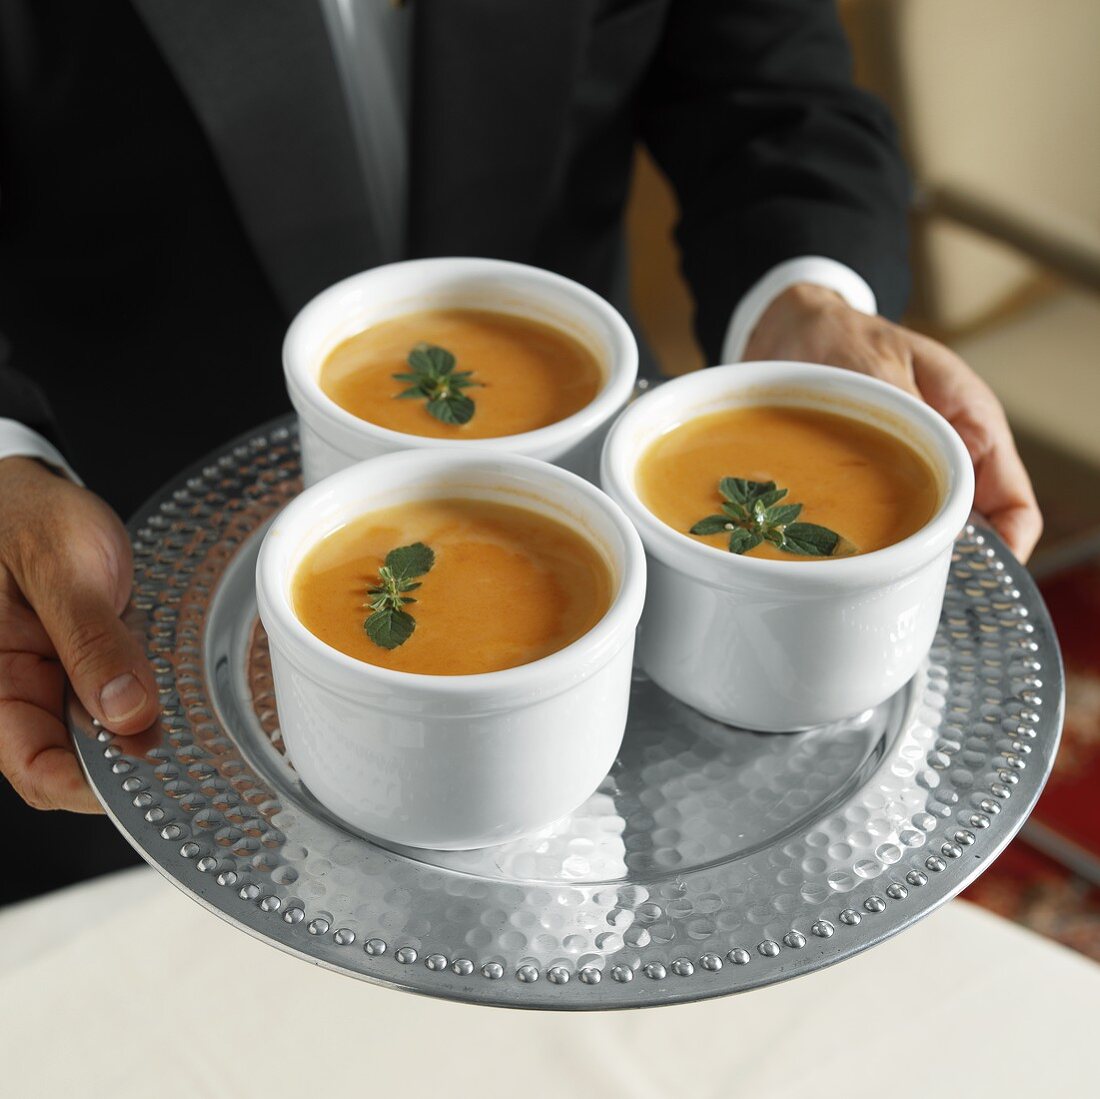 A Waiter Serving Three Bowls of Cream of Tomato Soup with Oregano